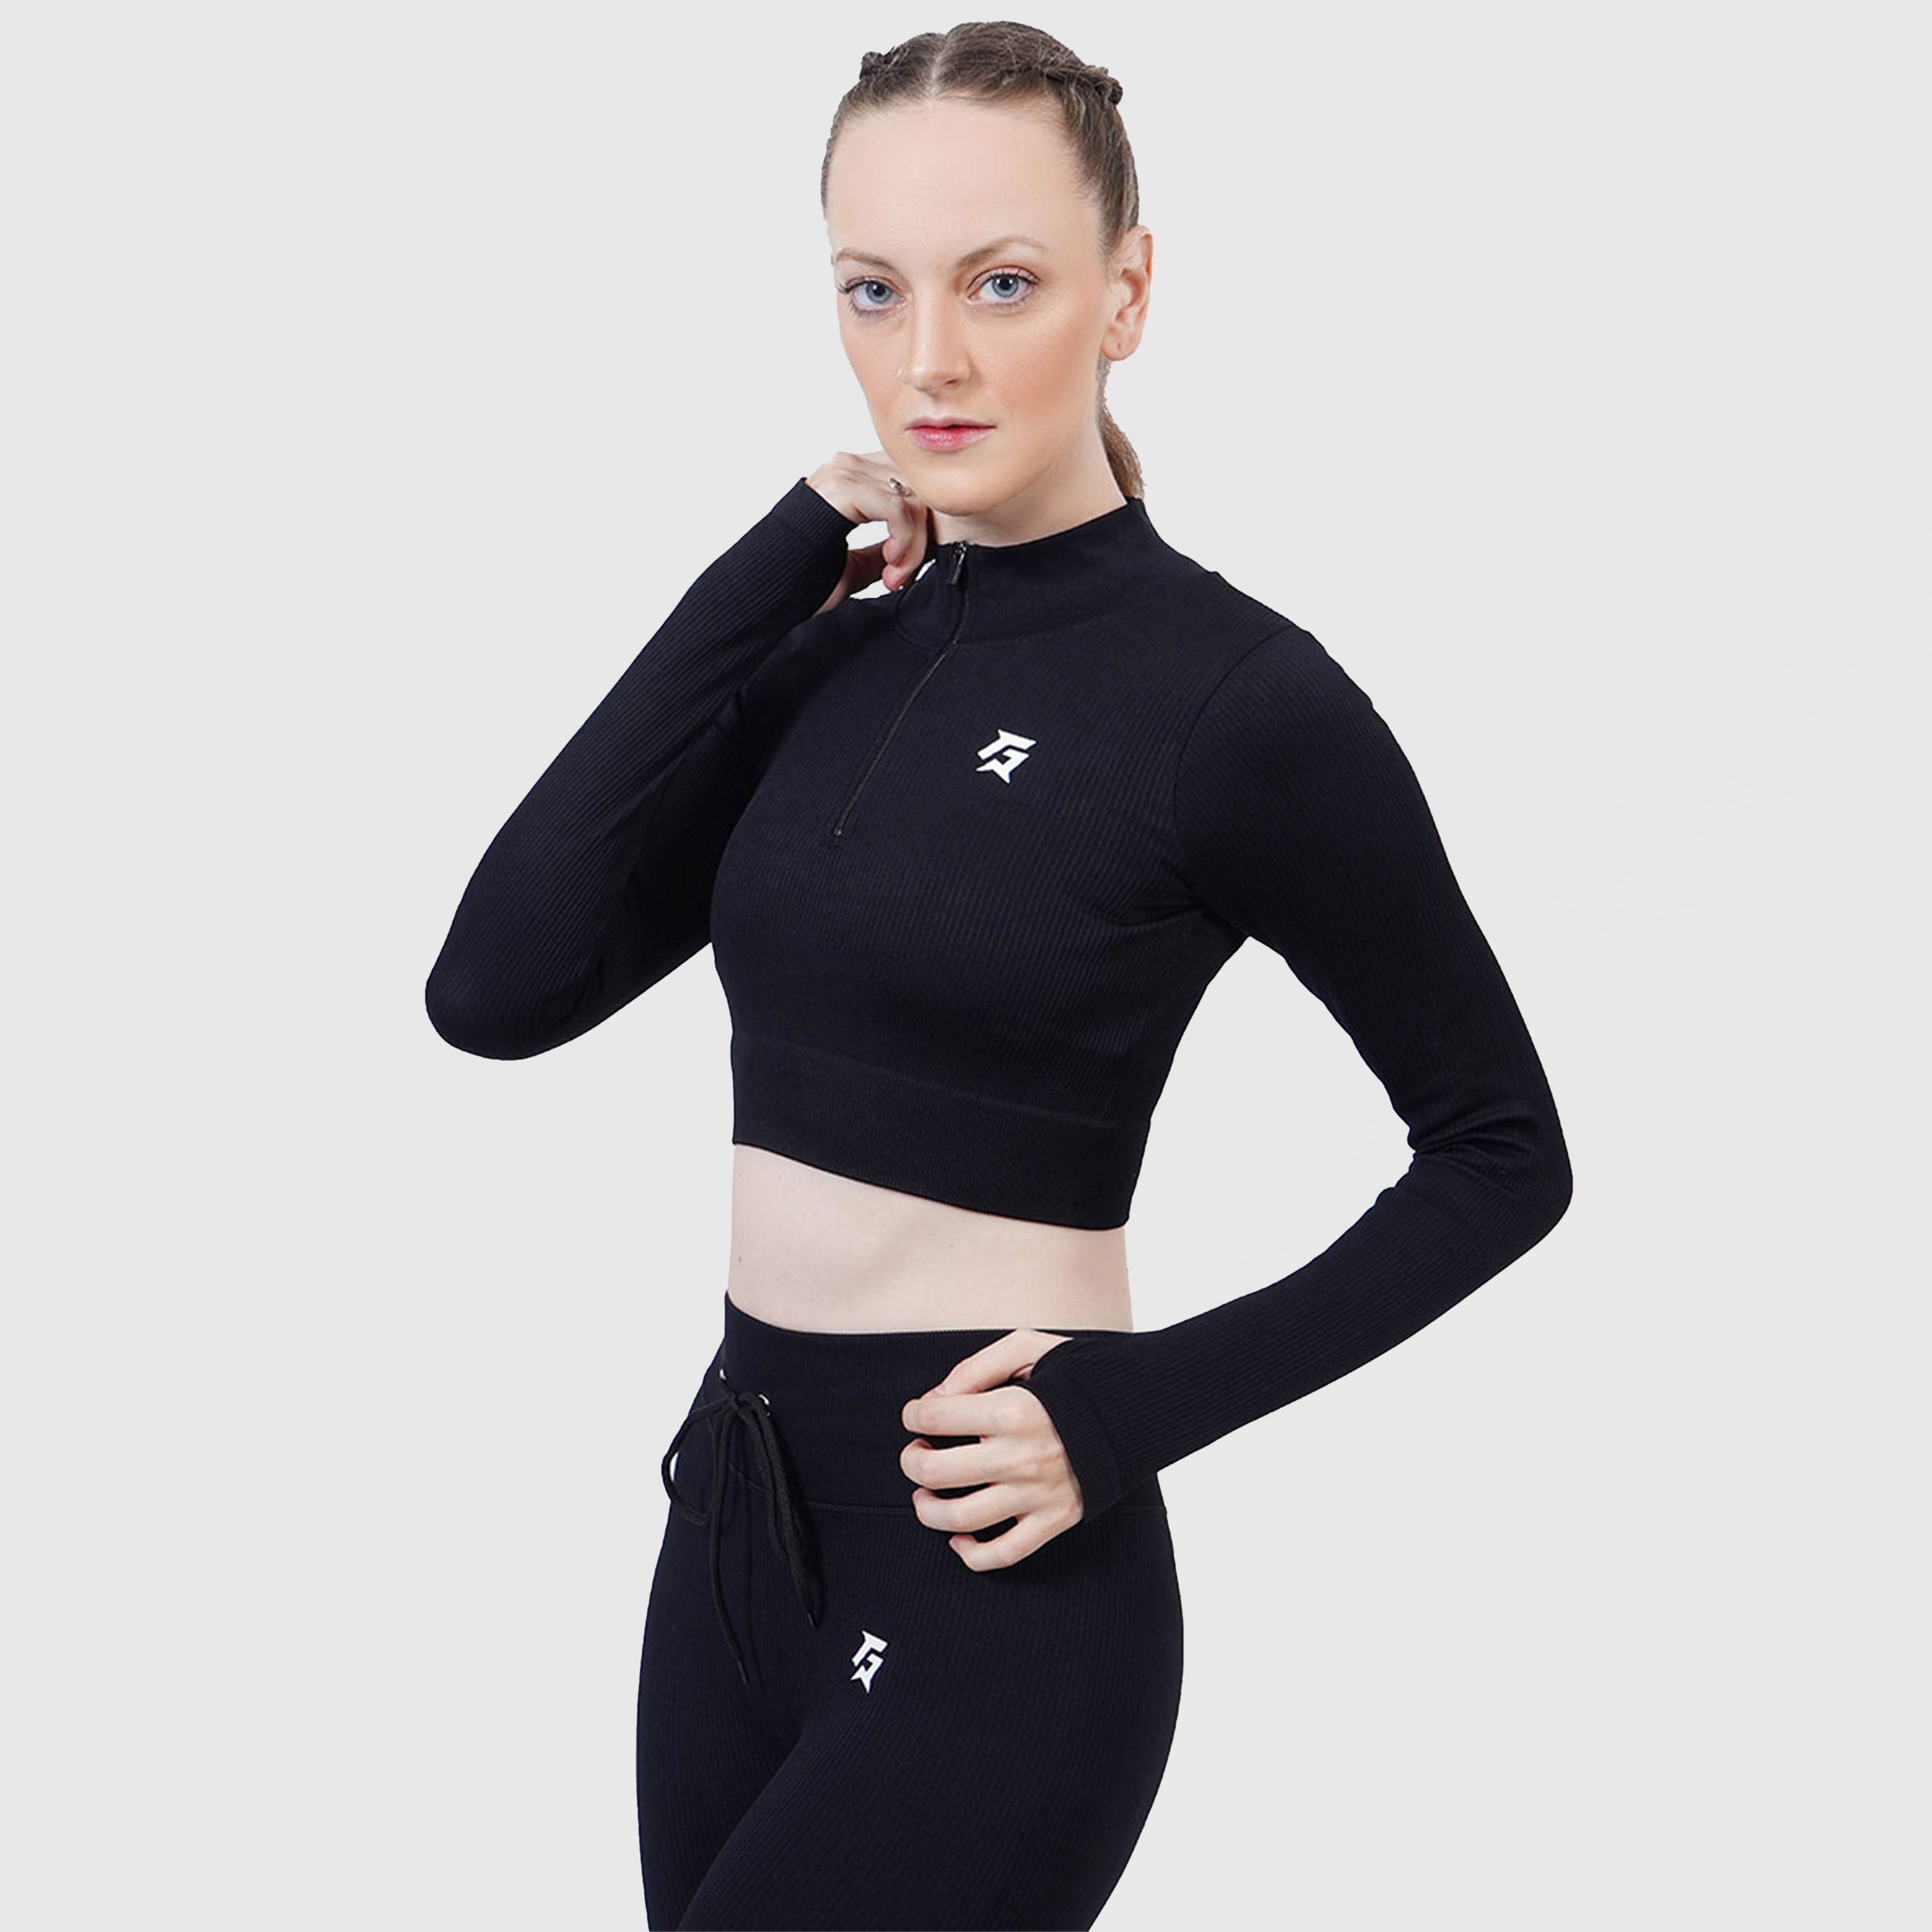 Fitness Ribbed Crop Top (Black)